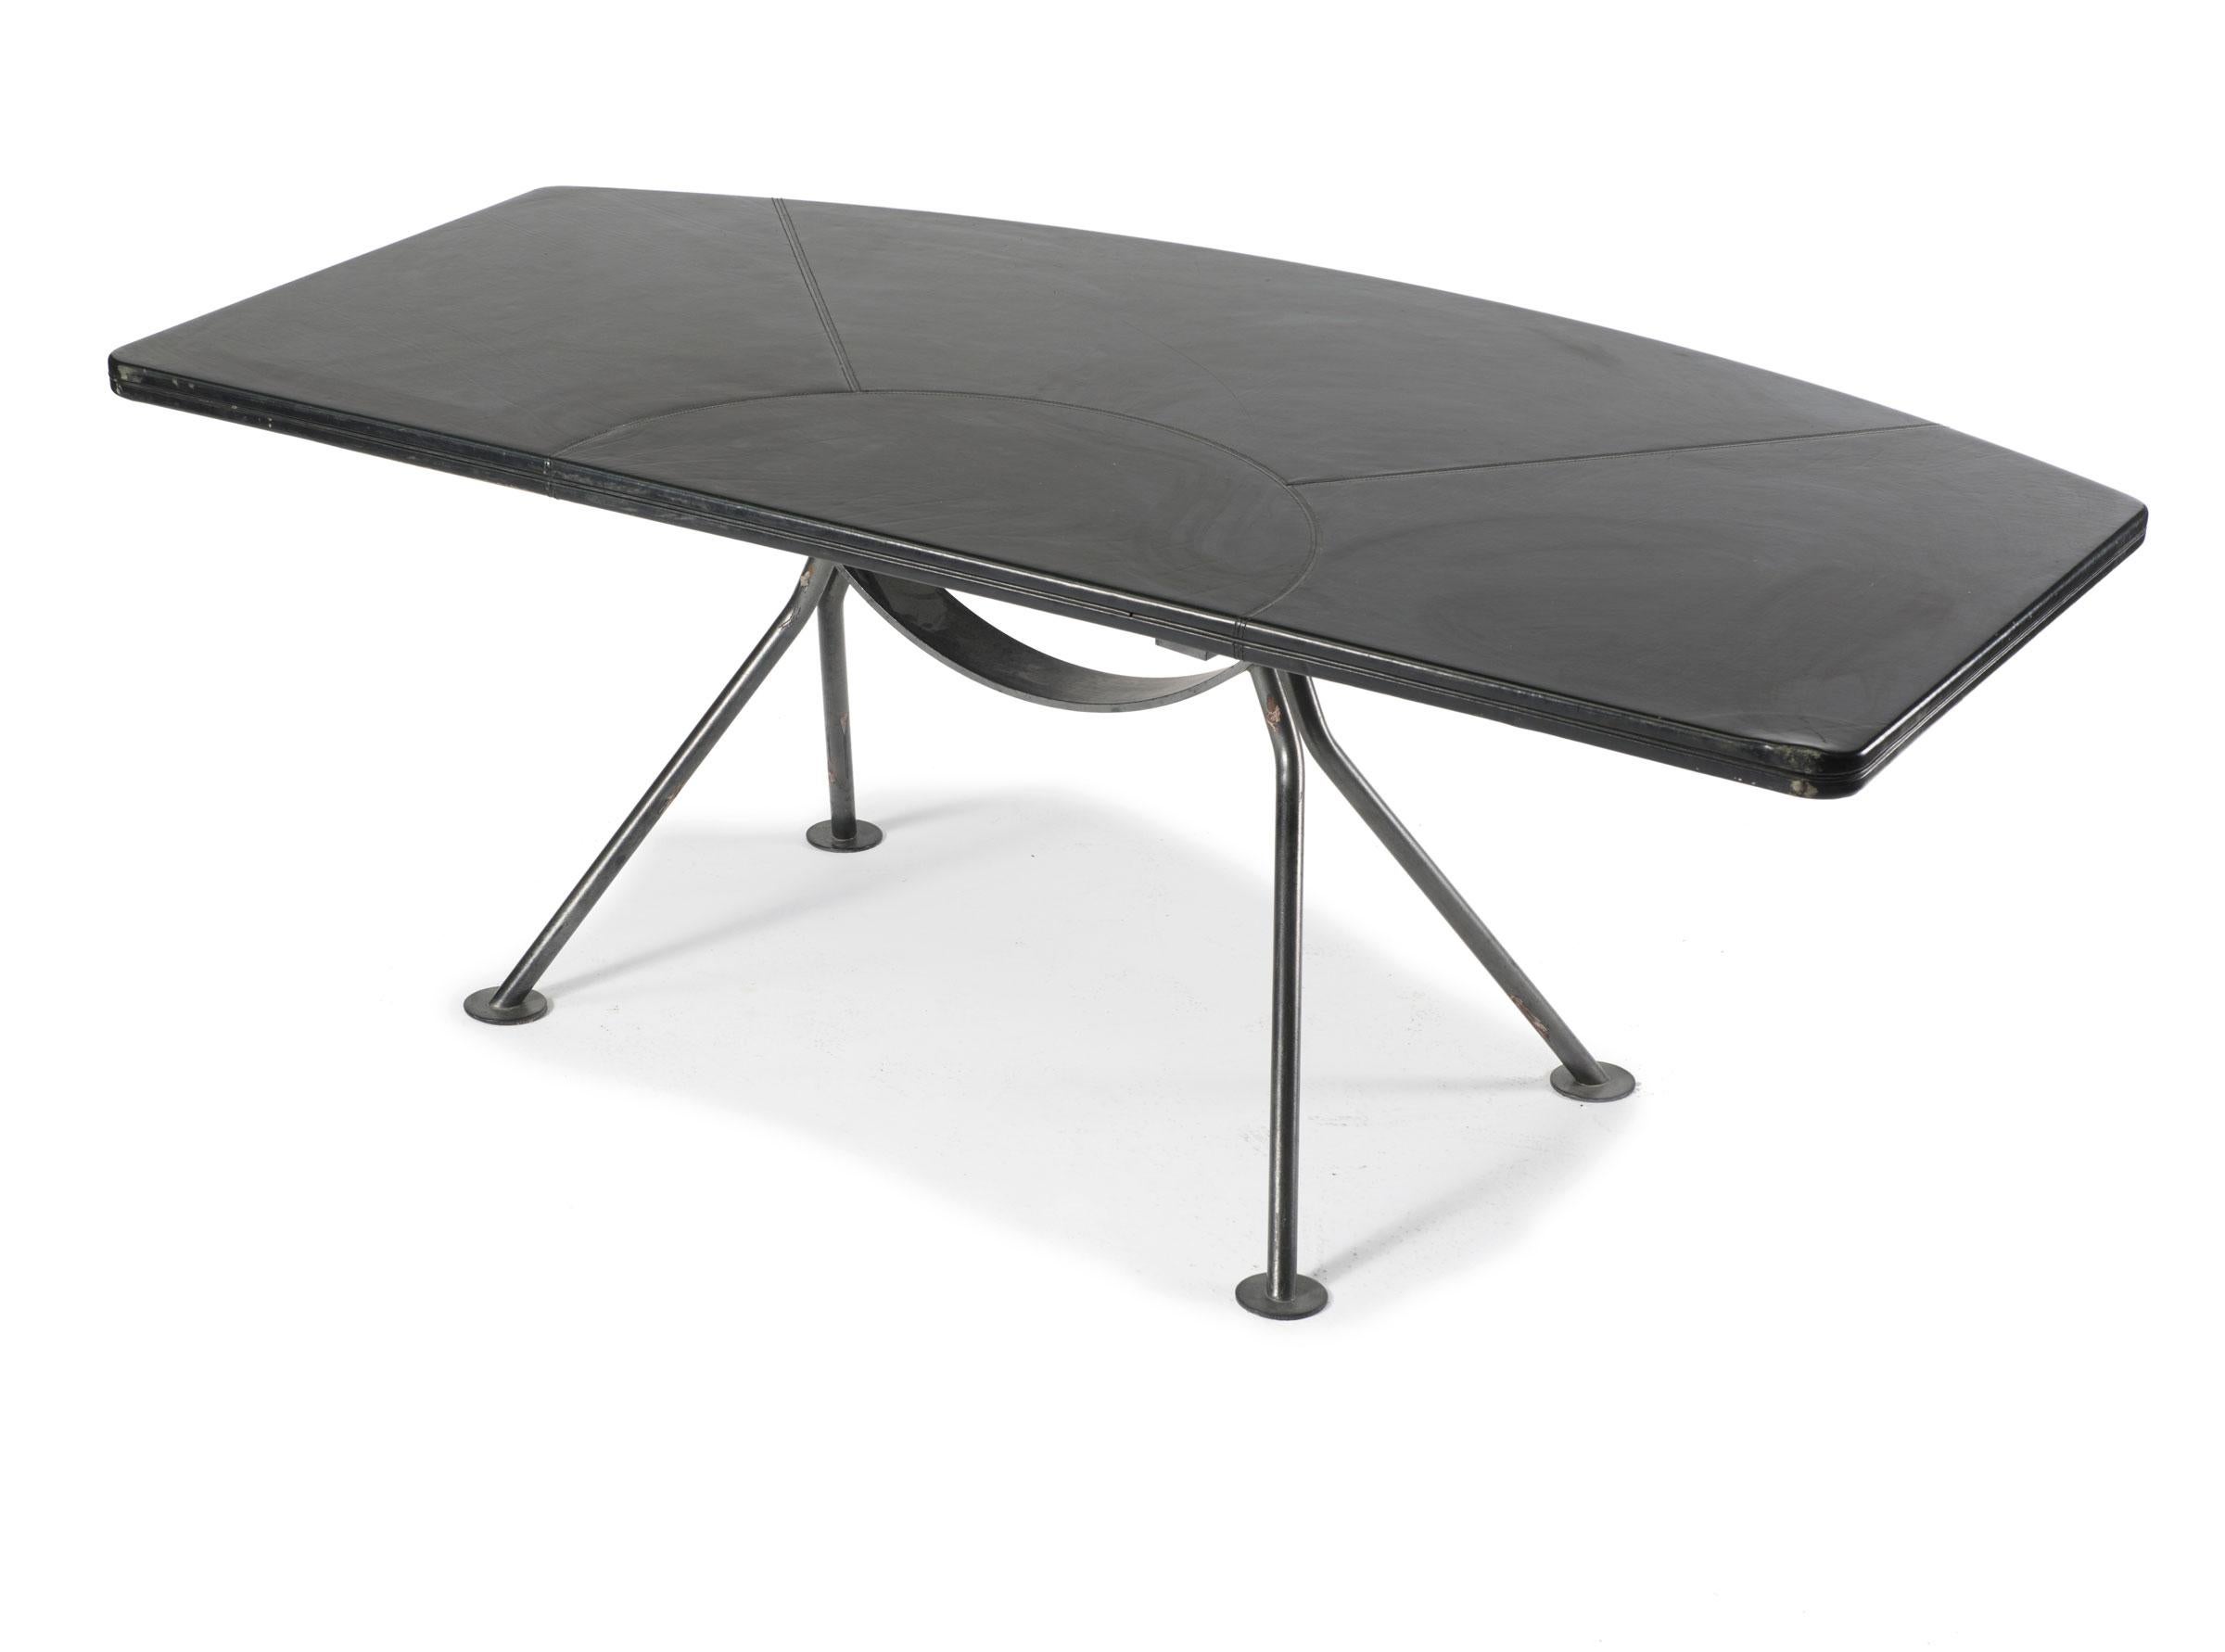 Exclusive designer desk Sir Norman Foster Architecture school, 1980s

Large, extravagant designer writing desk, two-part.
Tabletop made of black leather, hand sewn in symmetrical table layouts.

This desk is absolutely unique and comes from a